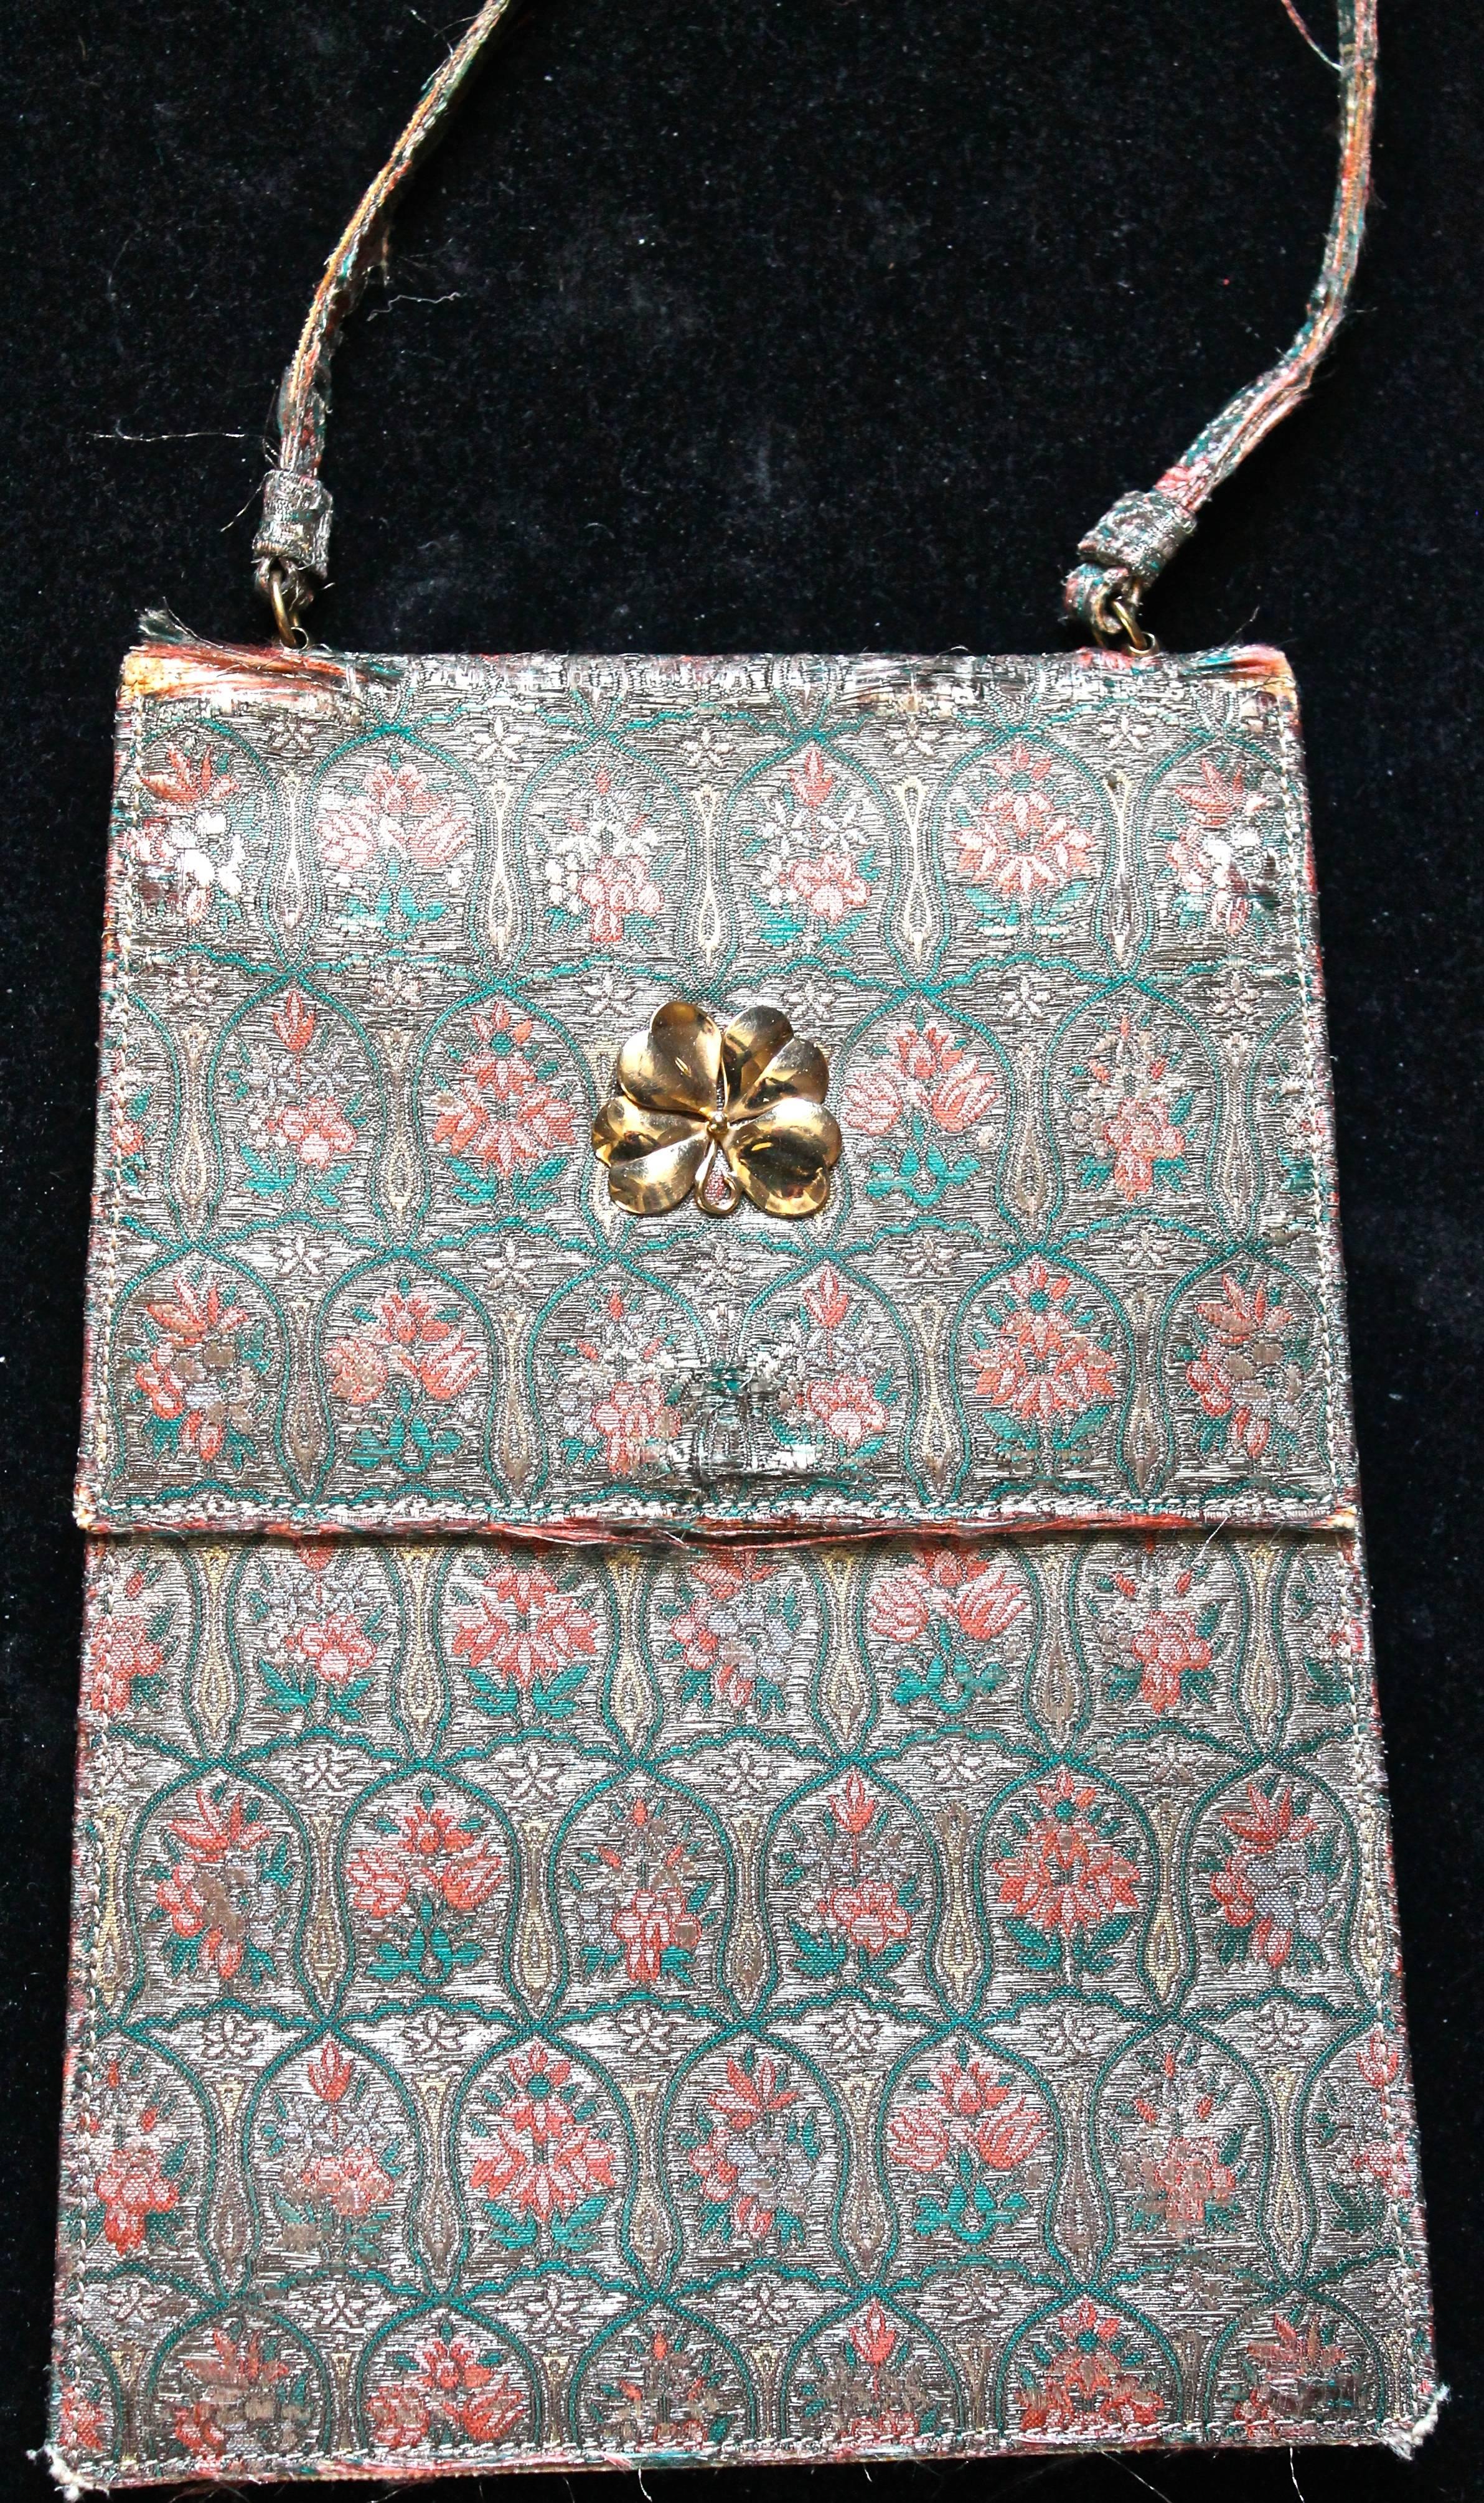 Cartier Art Deco evening bag. Silk with gold thread, gold clasp (untested). Silk interior with gilt monogram J.W.T. and signed Cartier.